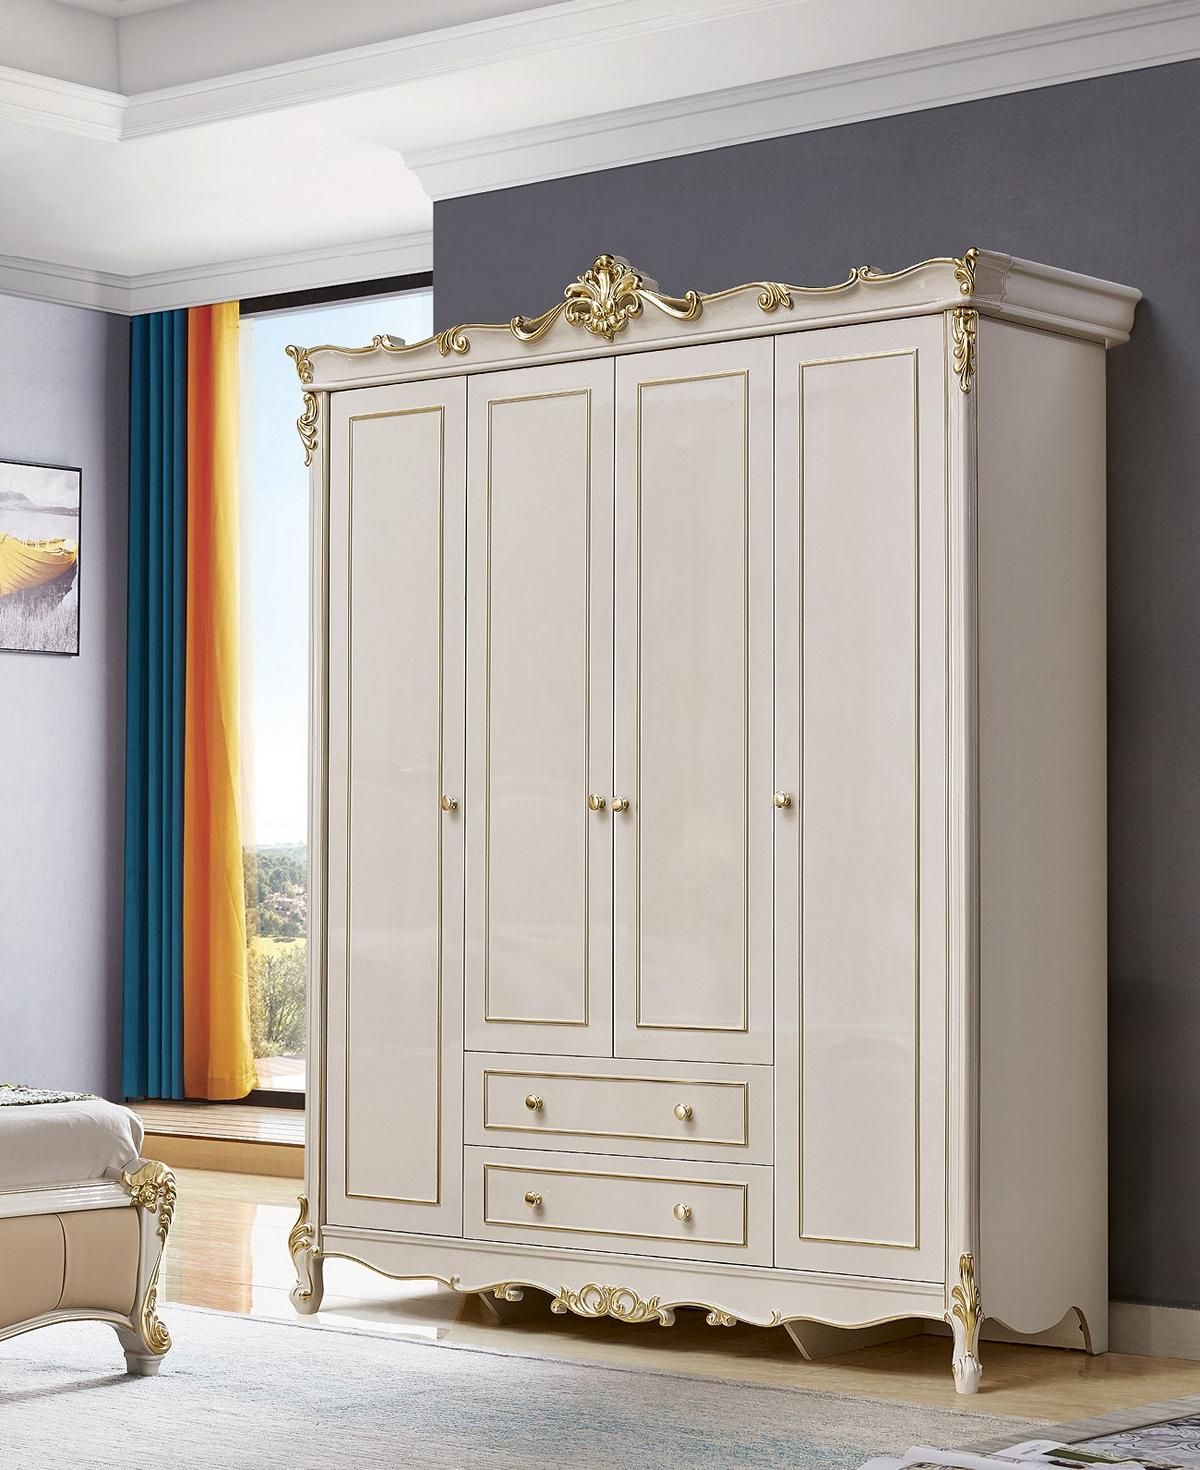 Find Your Favourite Wardrobe In Baroque Style From Us At Jvfurniture.co (View 15 of 20)